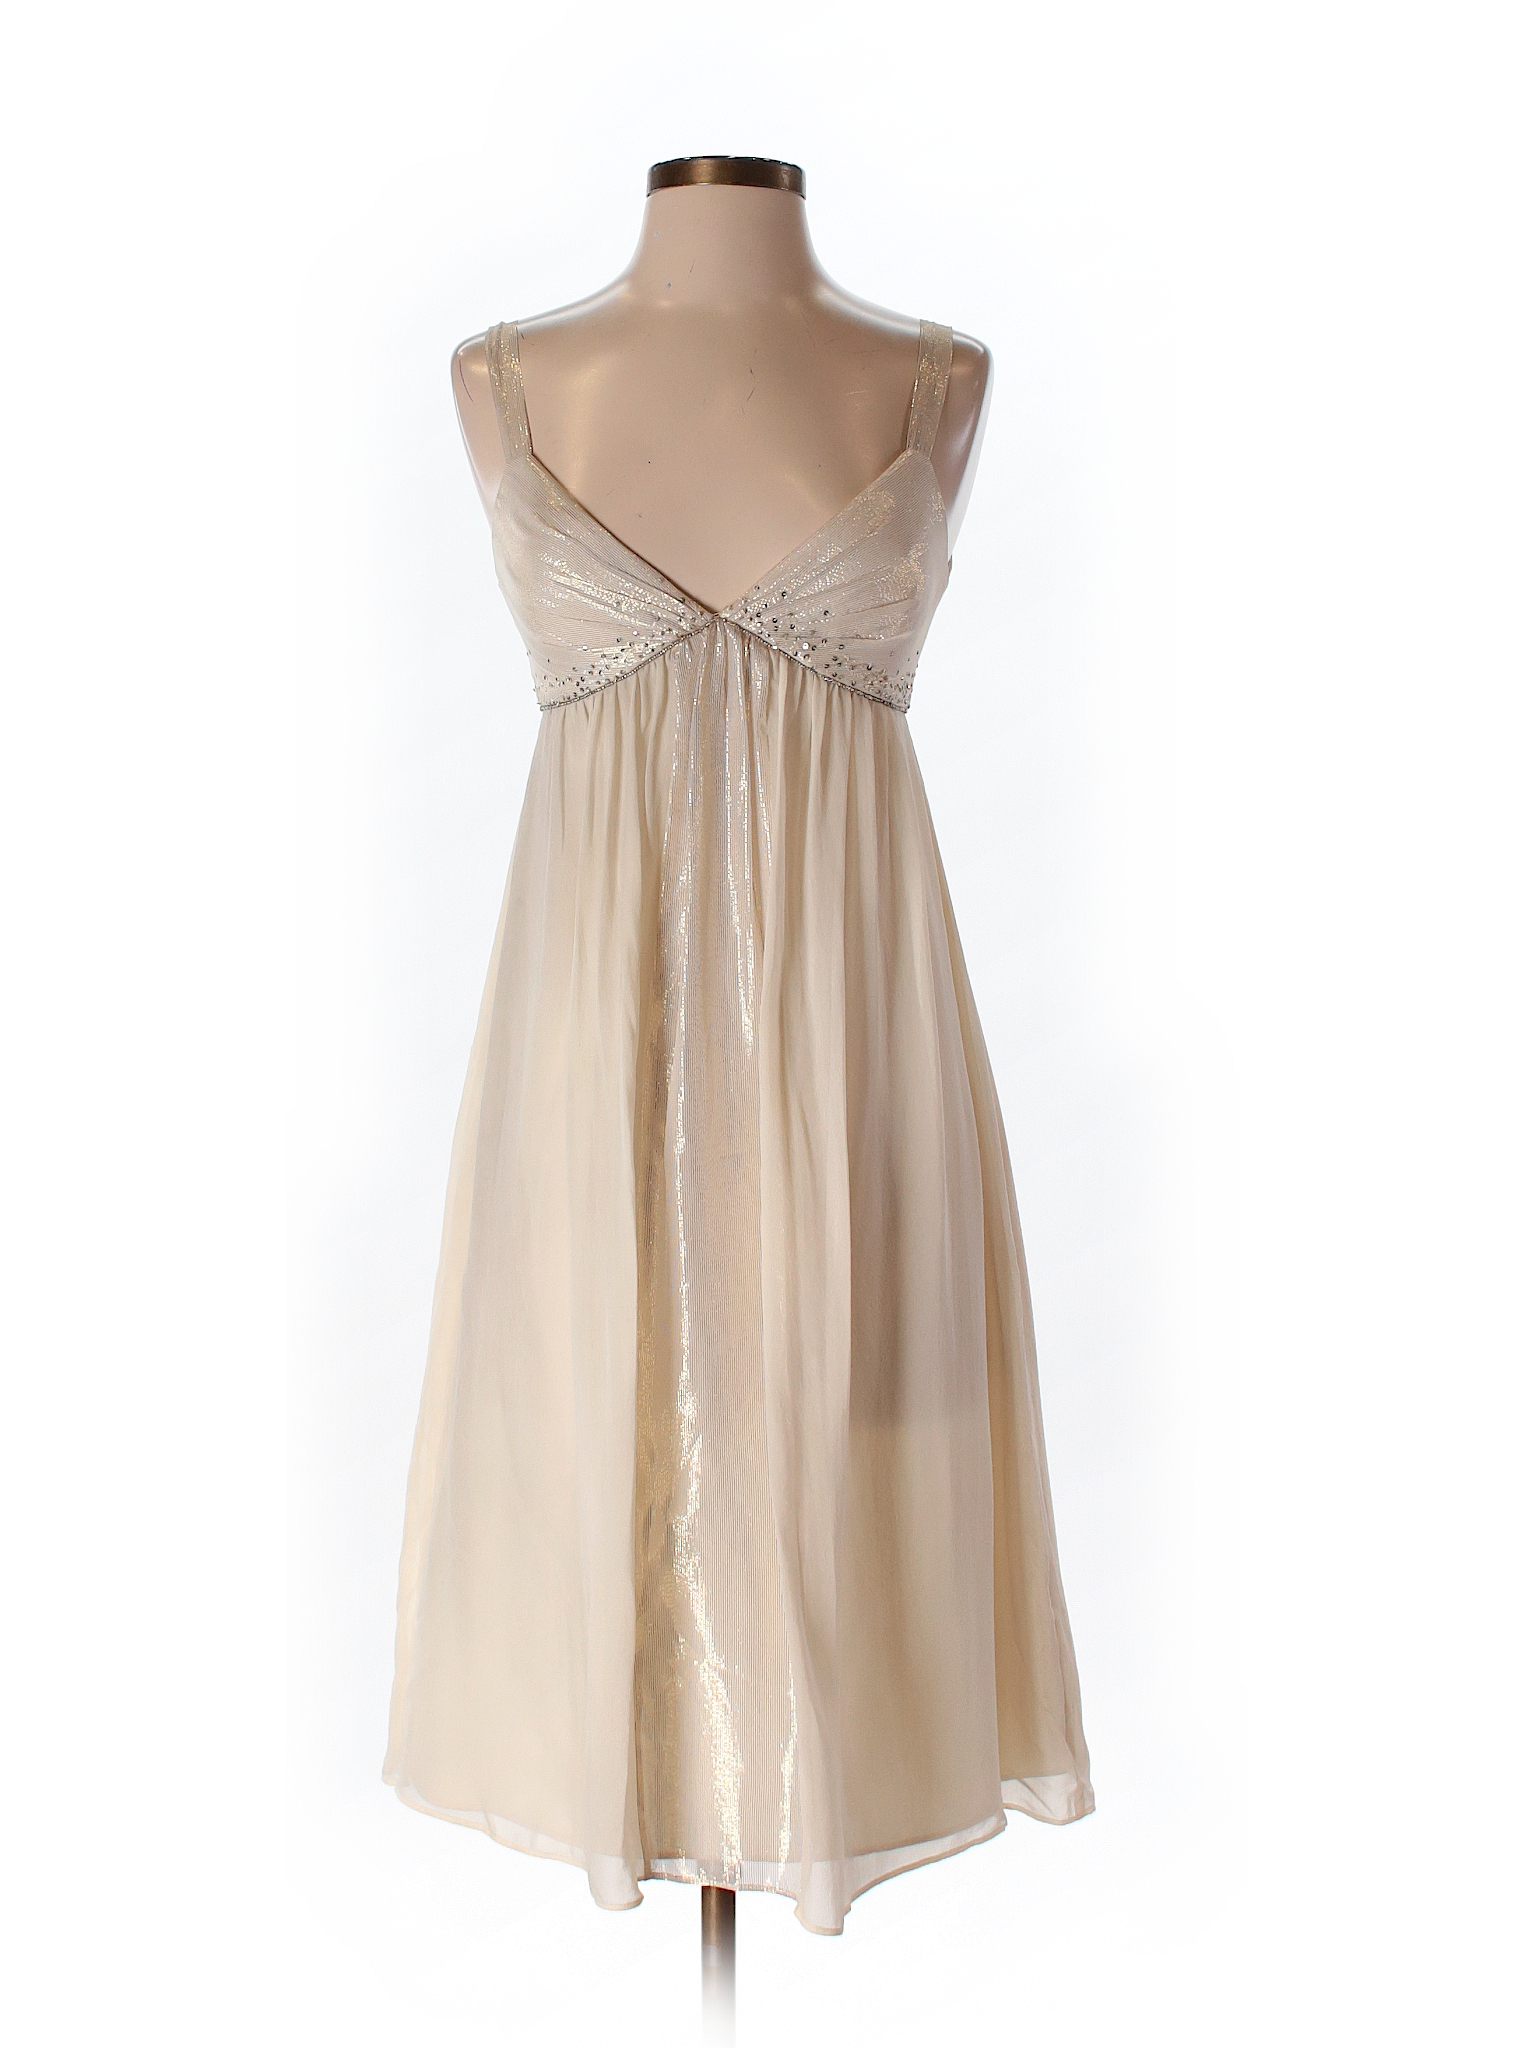 Max and Cleo Solid Beige Silk Dress Size 2 - 78% off | thredUP